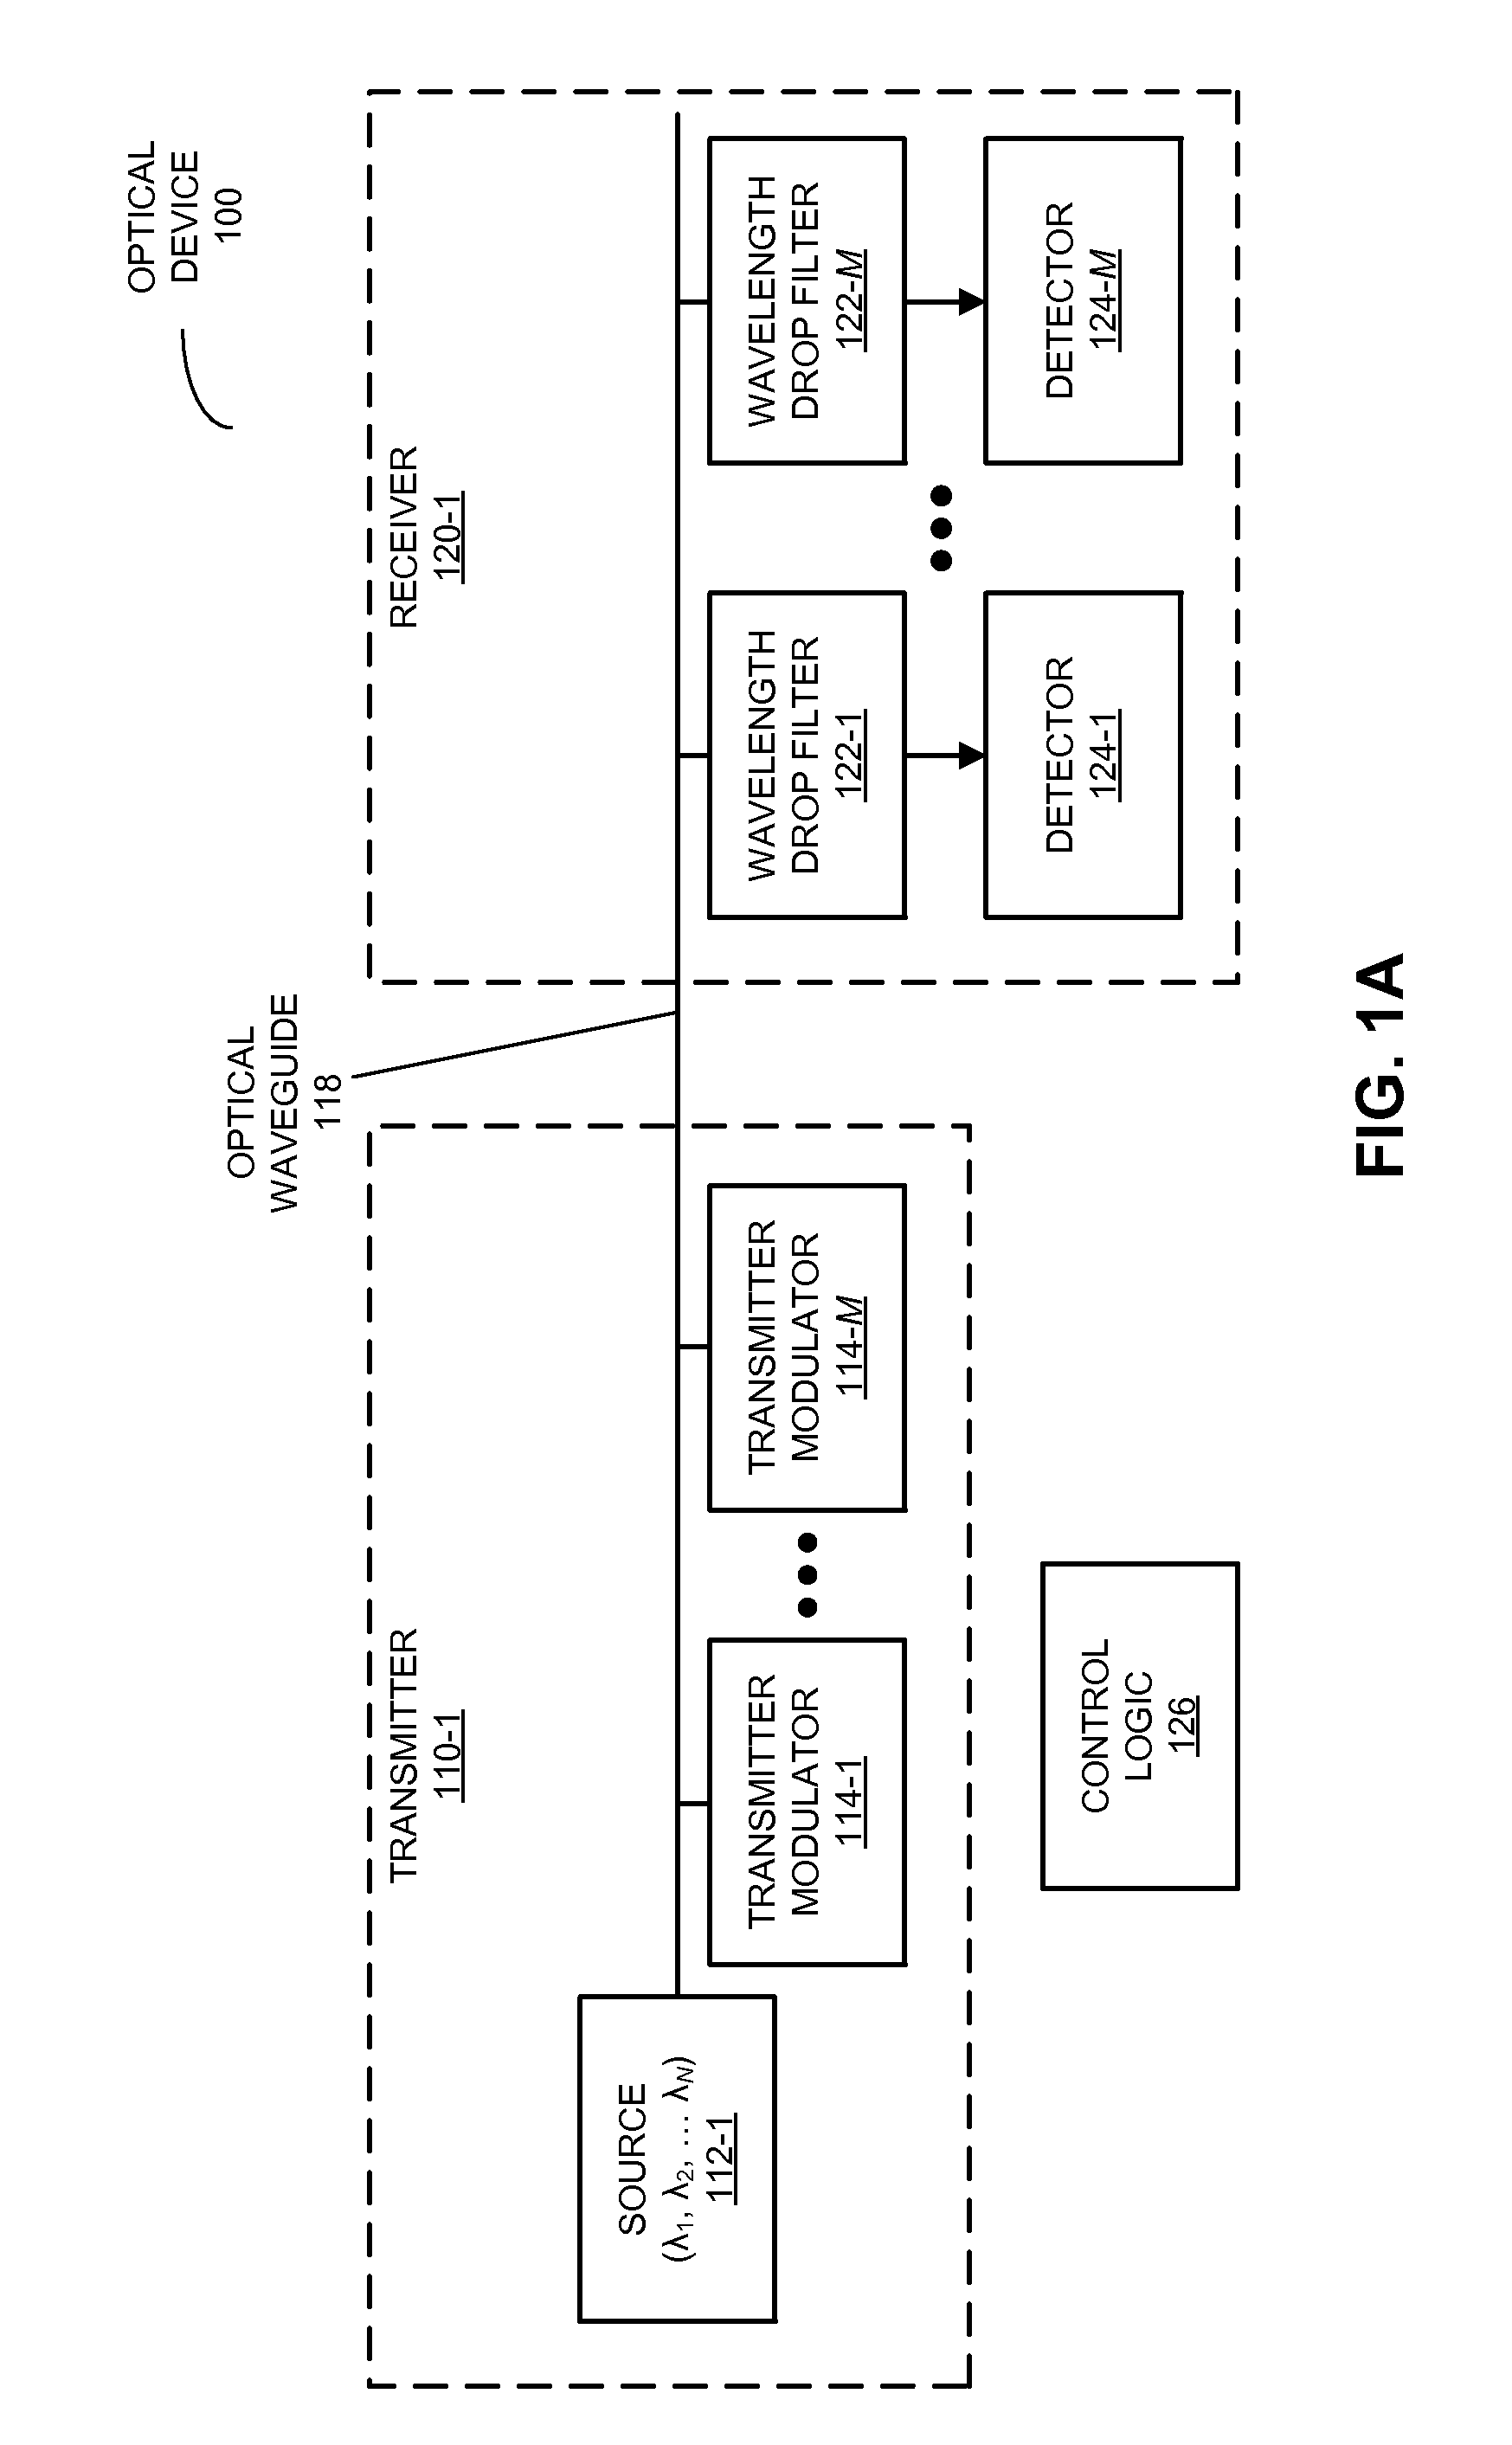 Optical device with reduced thermal tuning energy